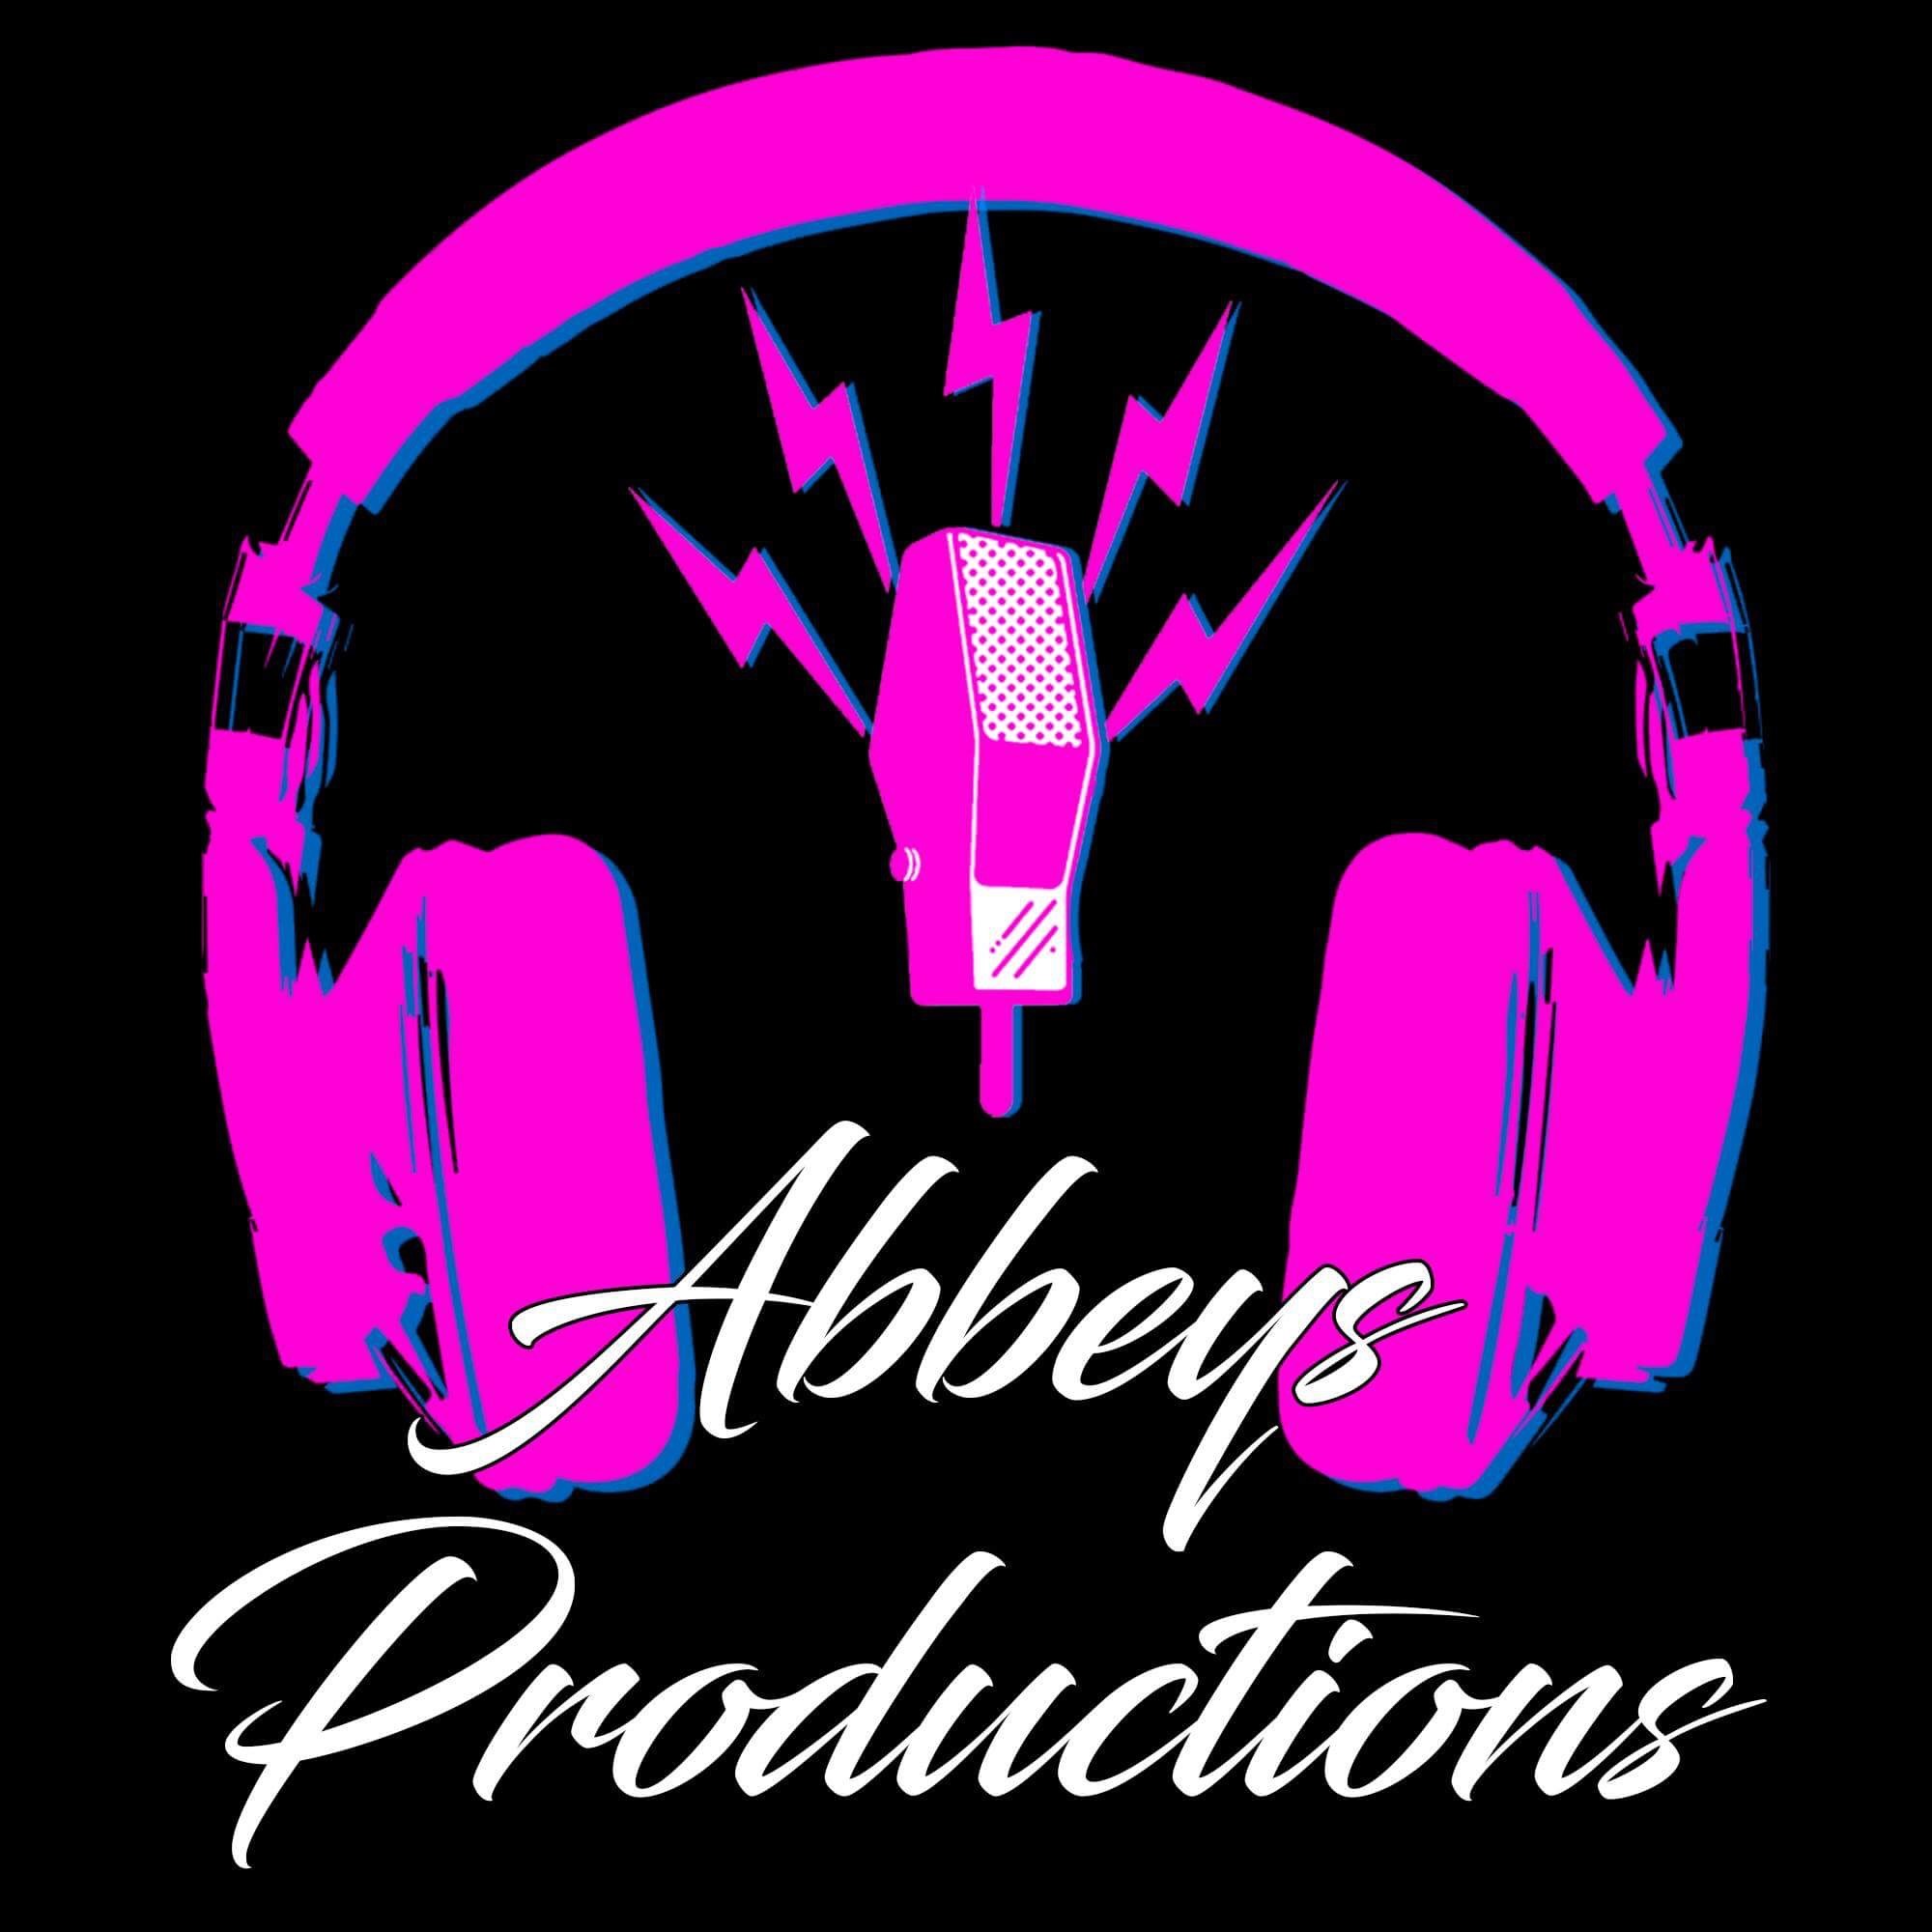 Abbeys Productions organizes and manages music events for artists from a multitude of genres. Their website can be reached at